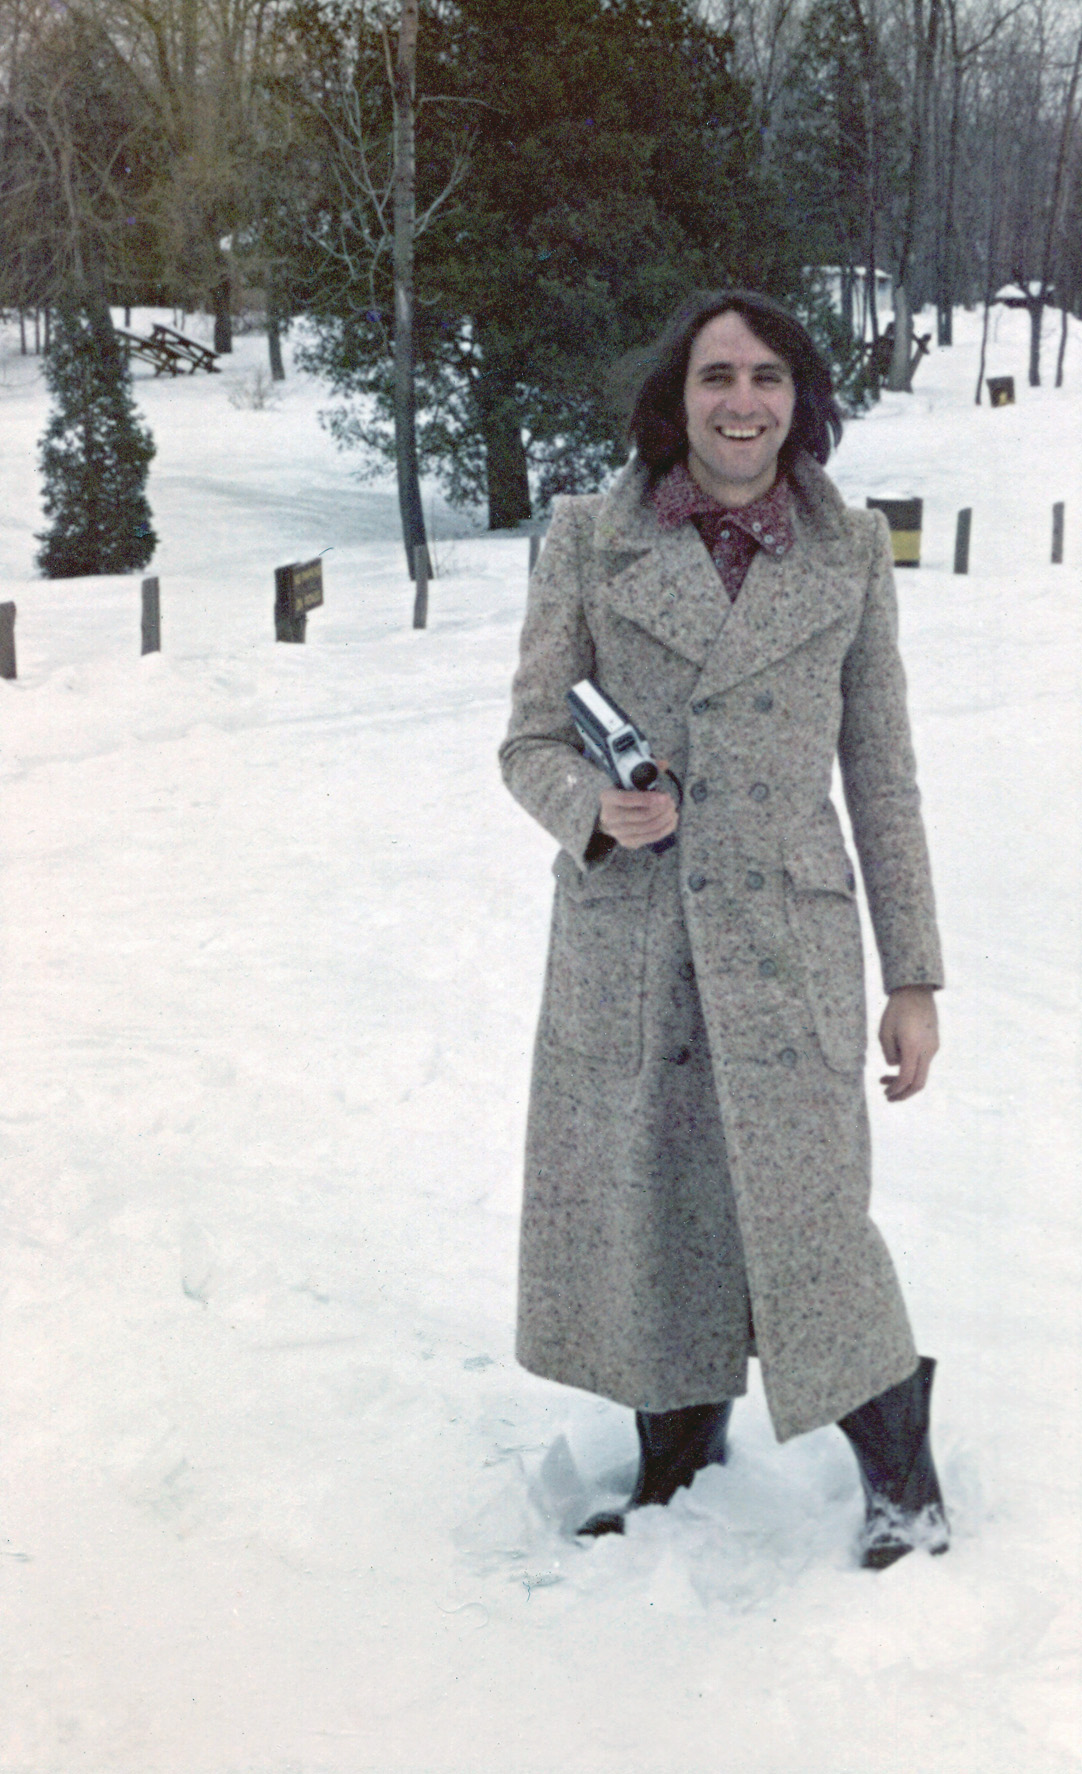 My dad filming in the snow with his super 8mm camera, Toronto, Ontario, January 1971. View full size.